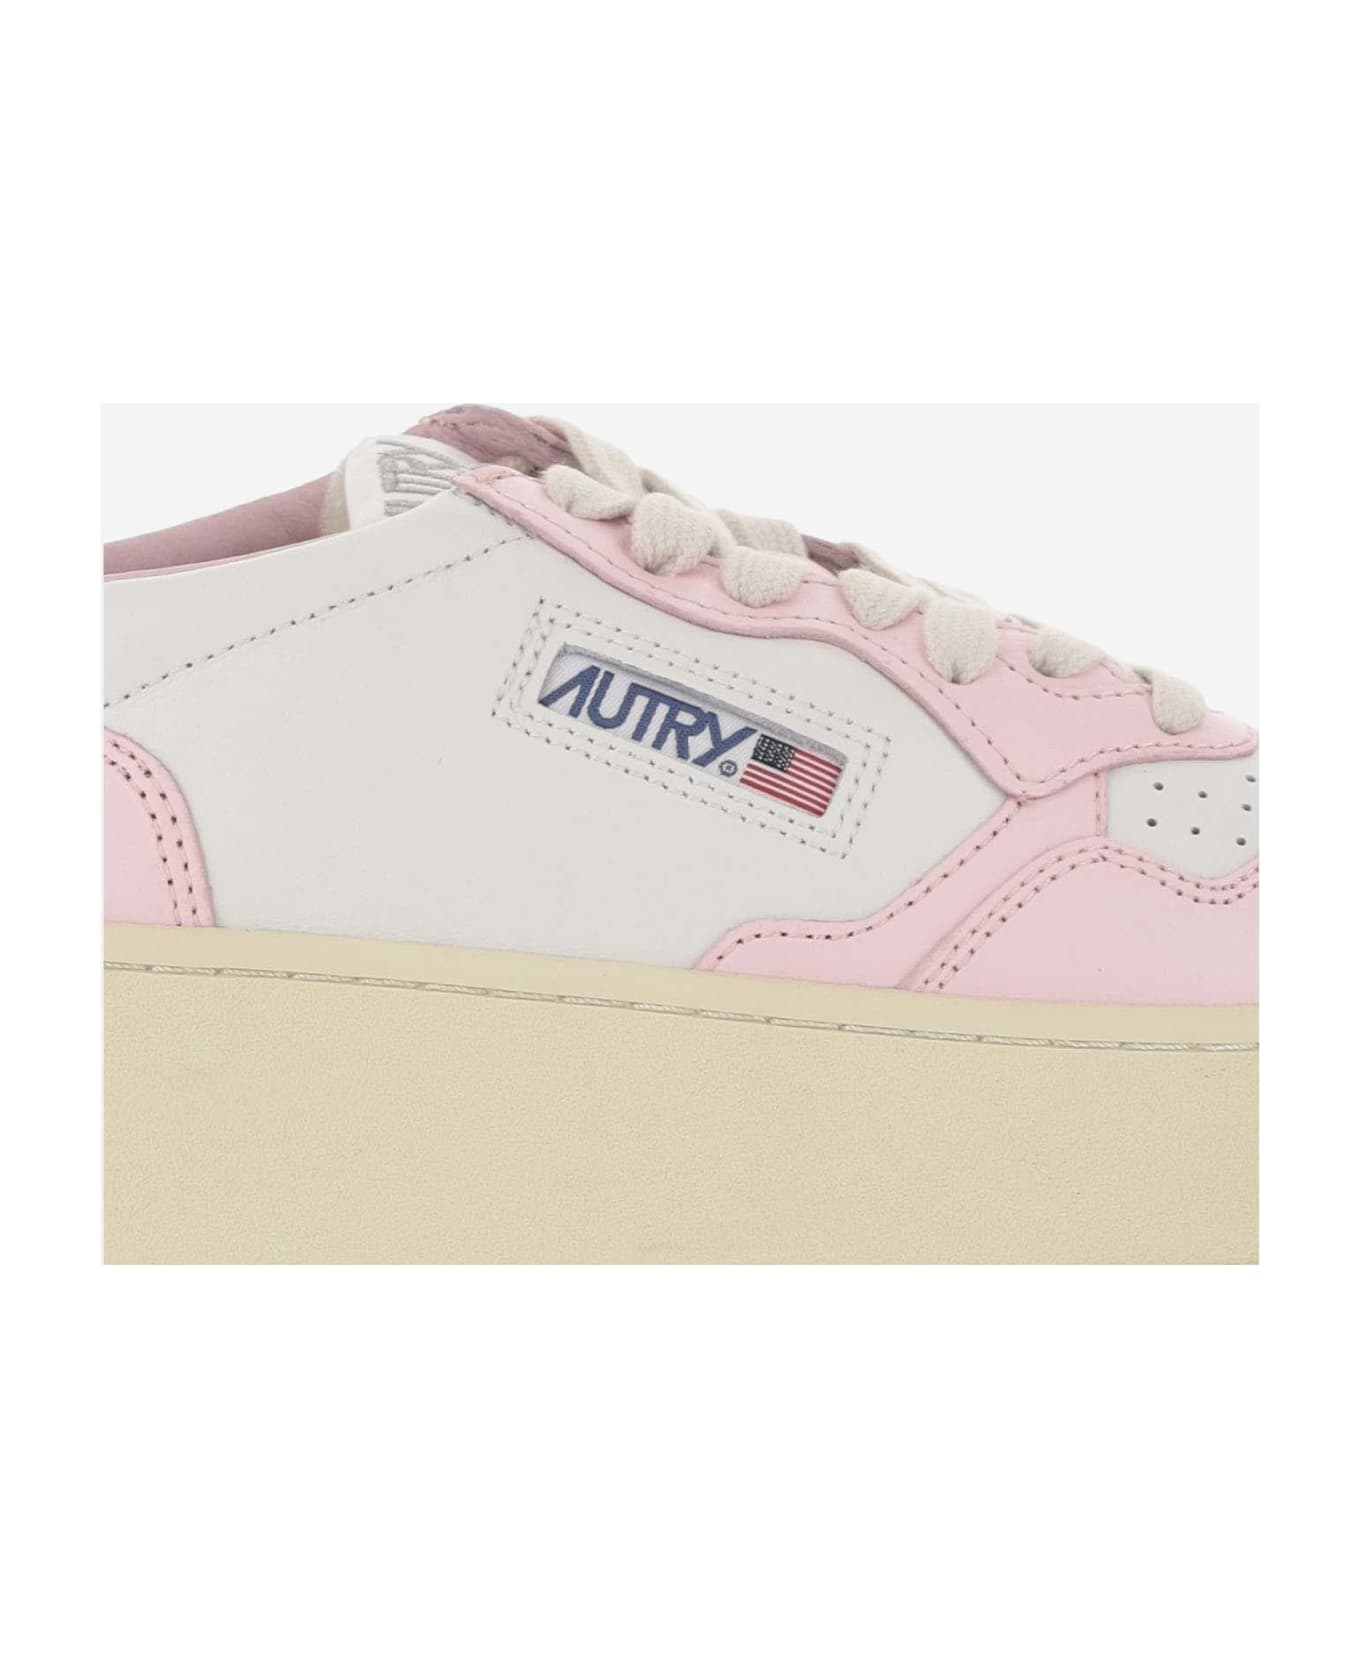 Autry Medalist Platform Low Leather Sneakers - Non definito